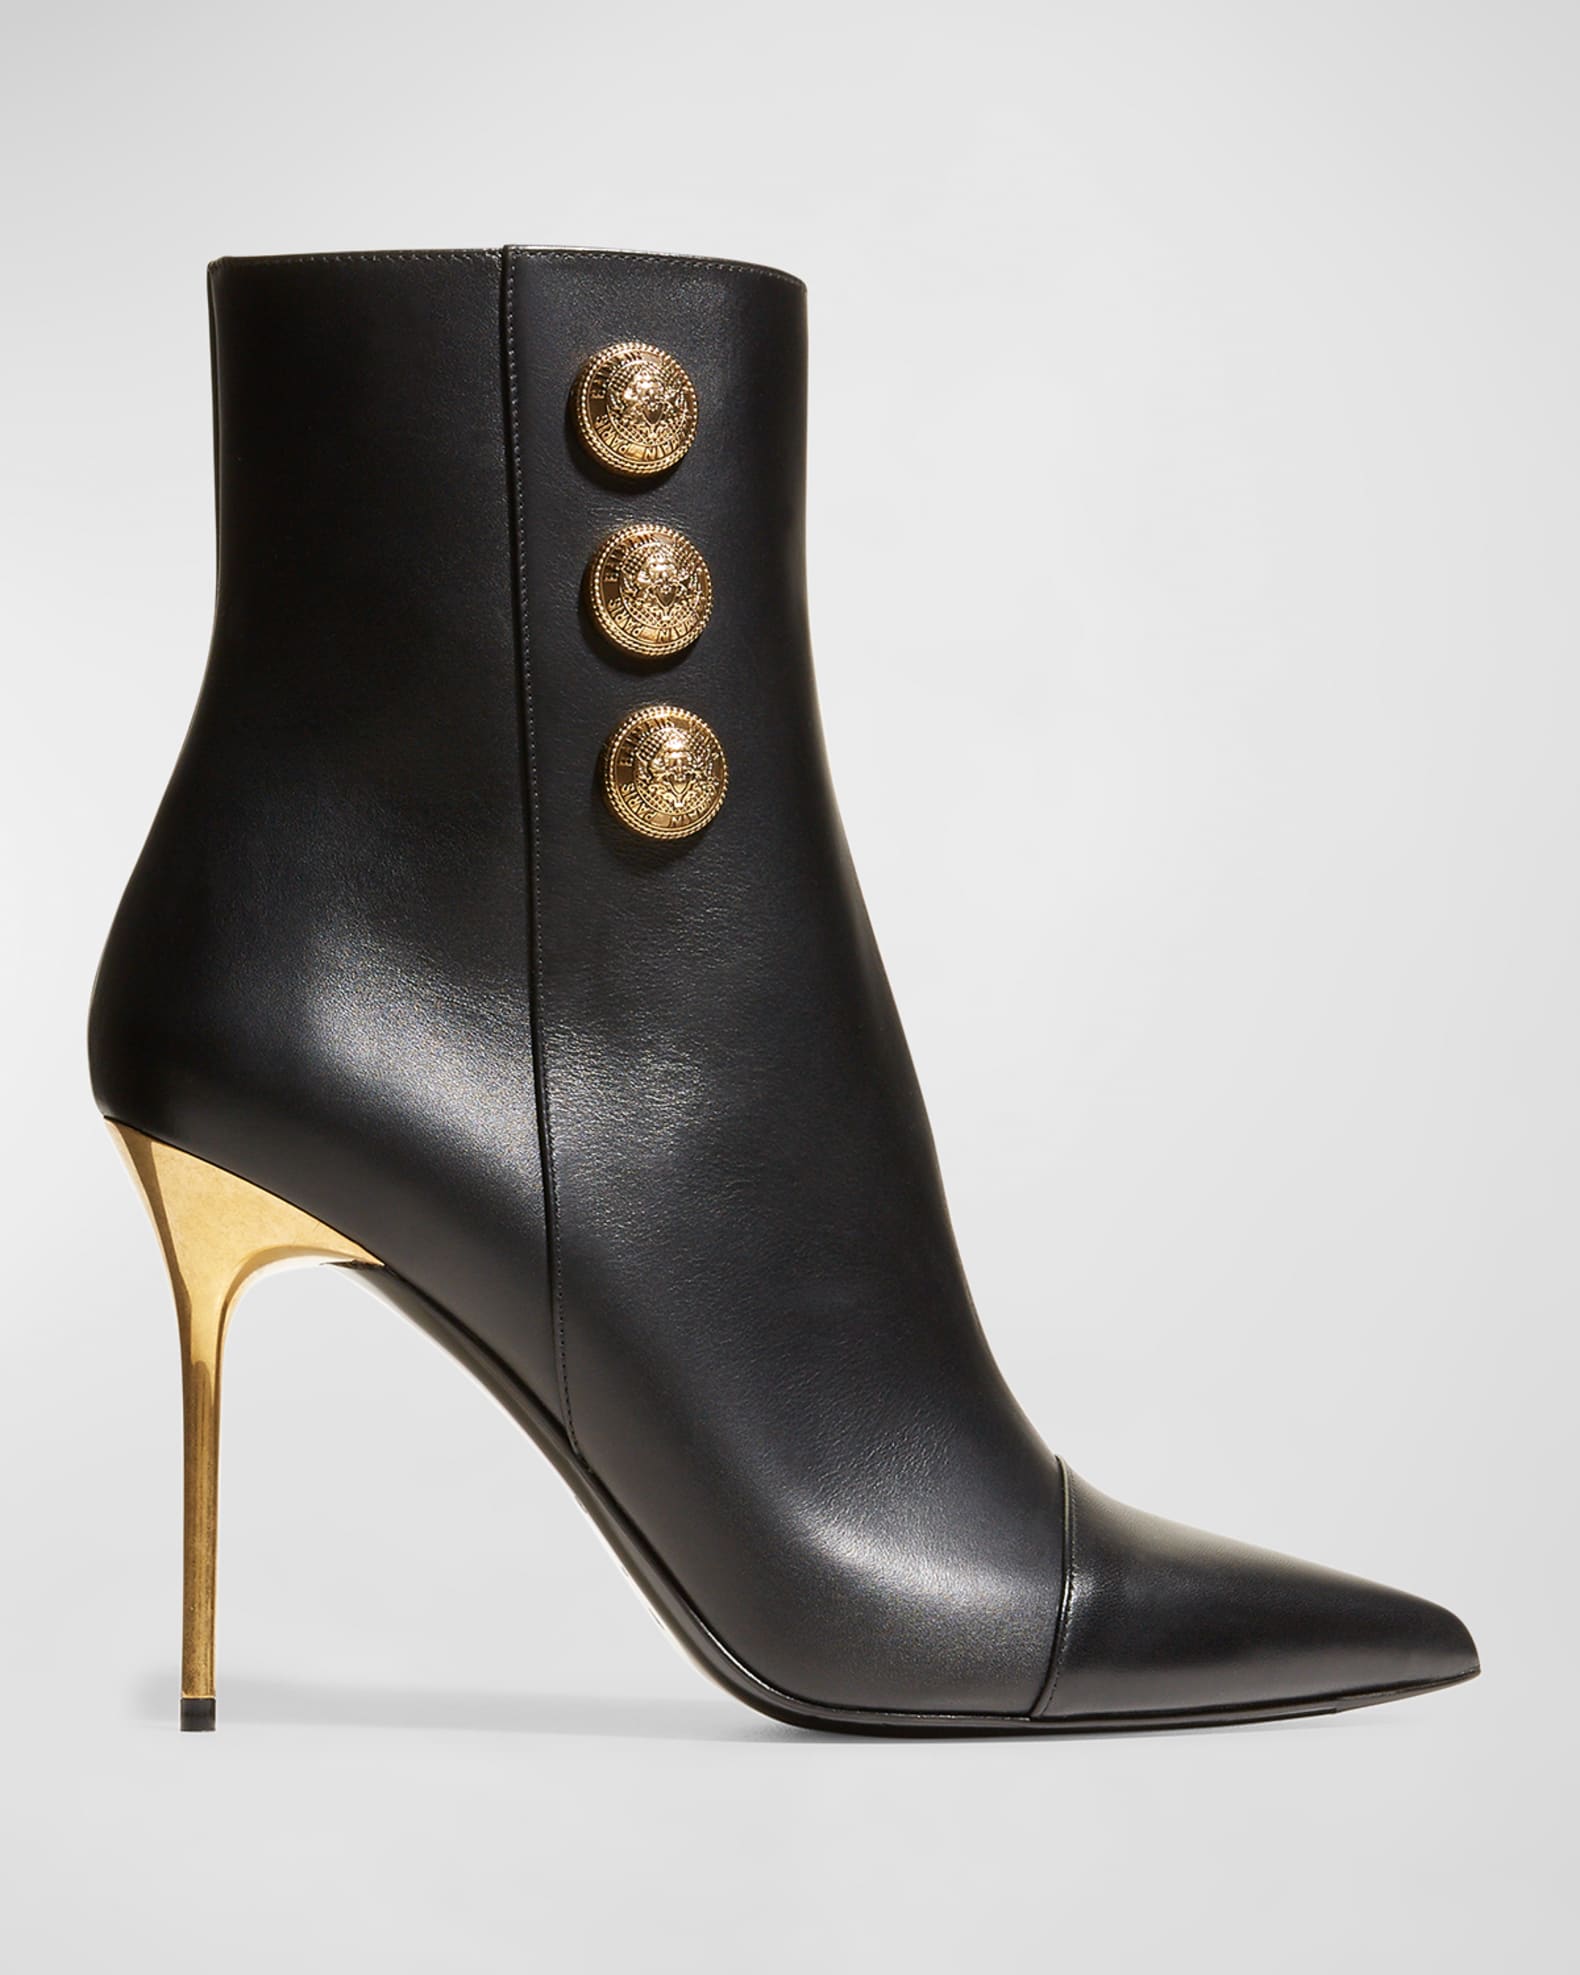 The Epitome of Chic: Balmain's Roni Boot